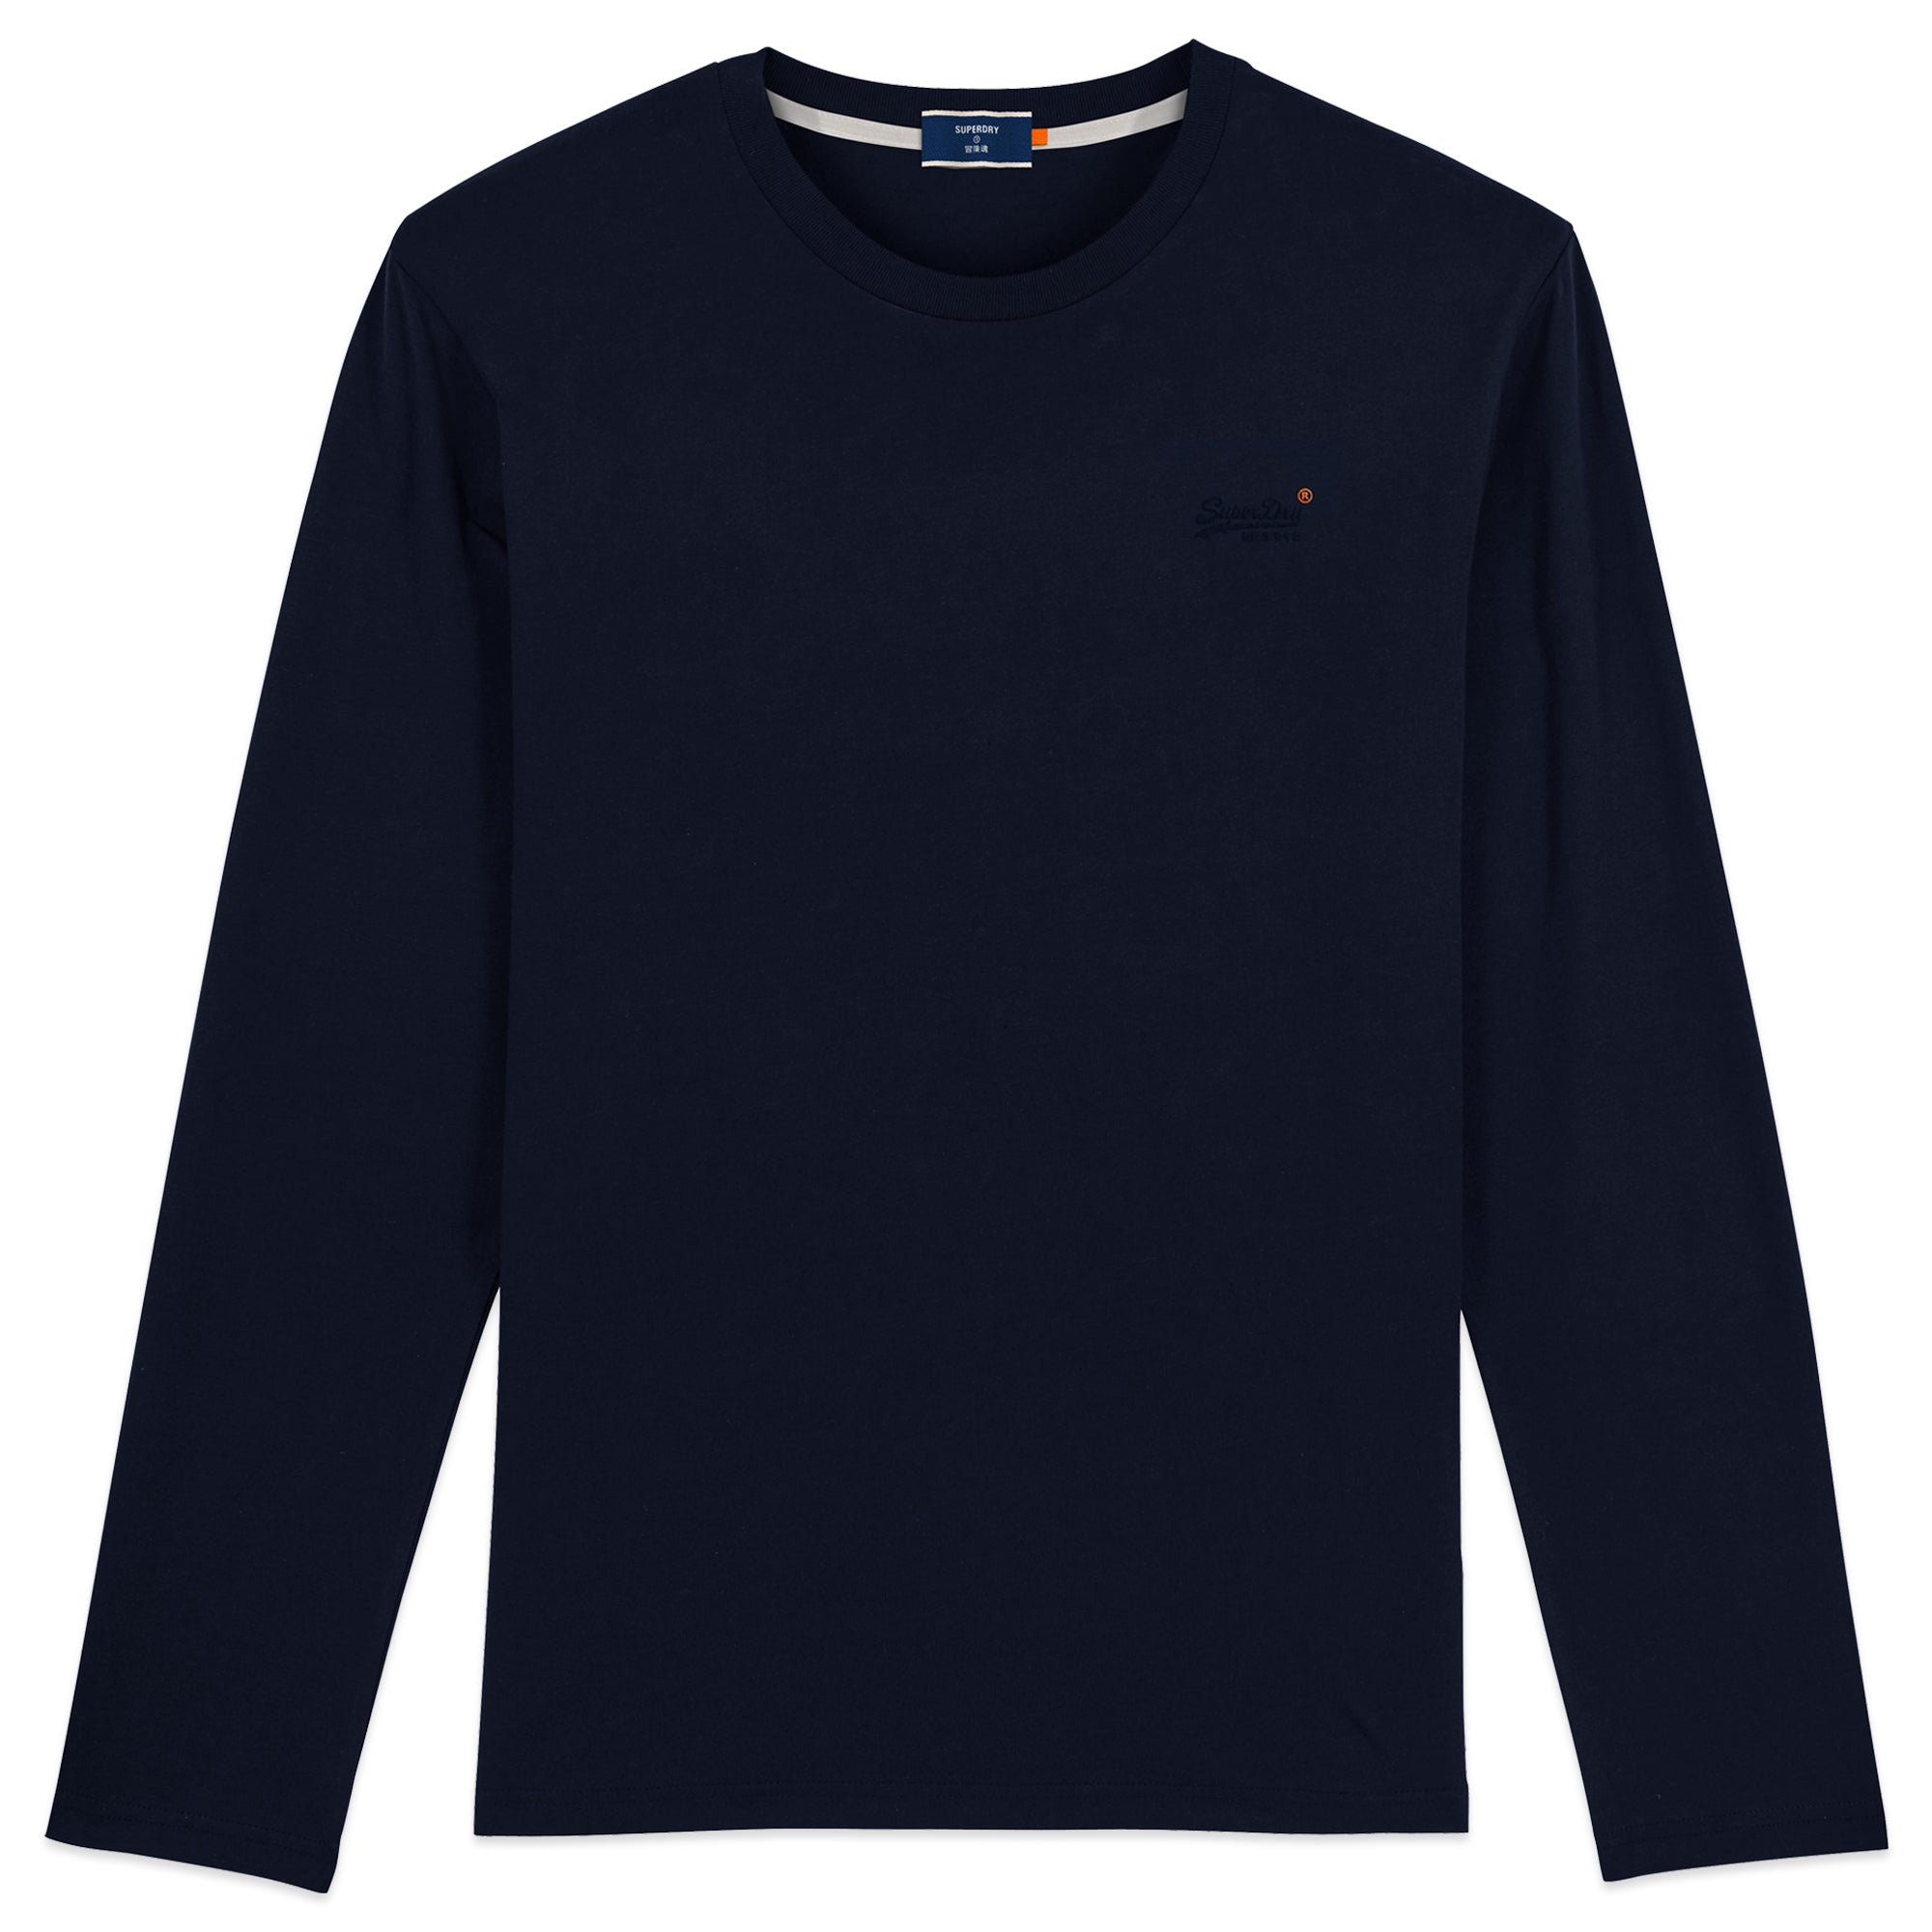 Superdry Orange Label Vintage Embroidery Long Sleeve T-Shirt - Rich Navy